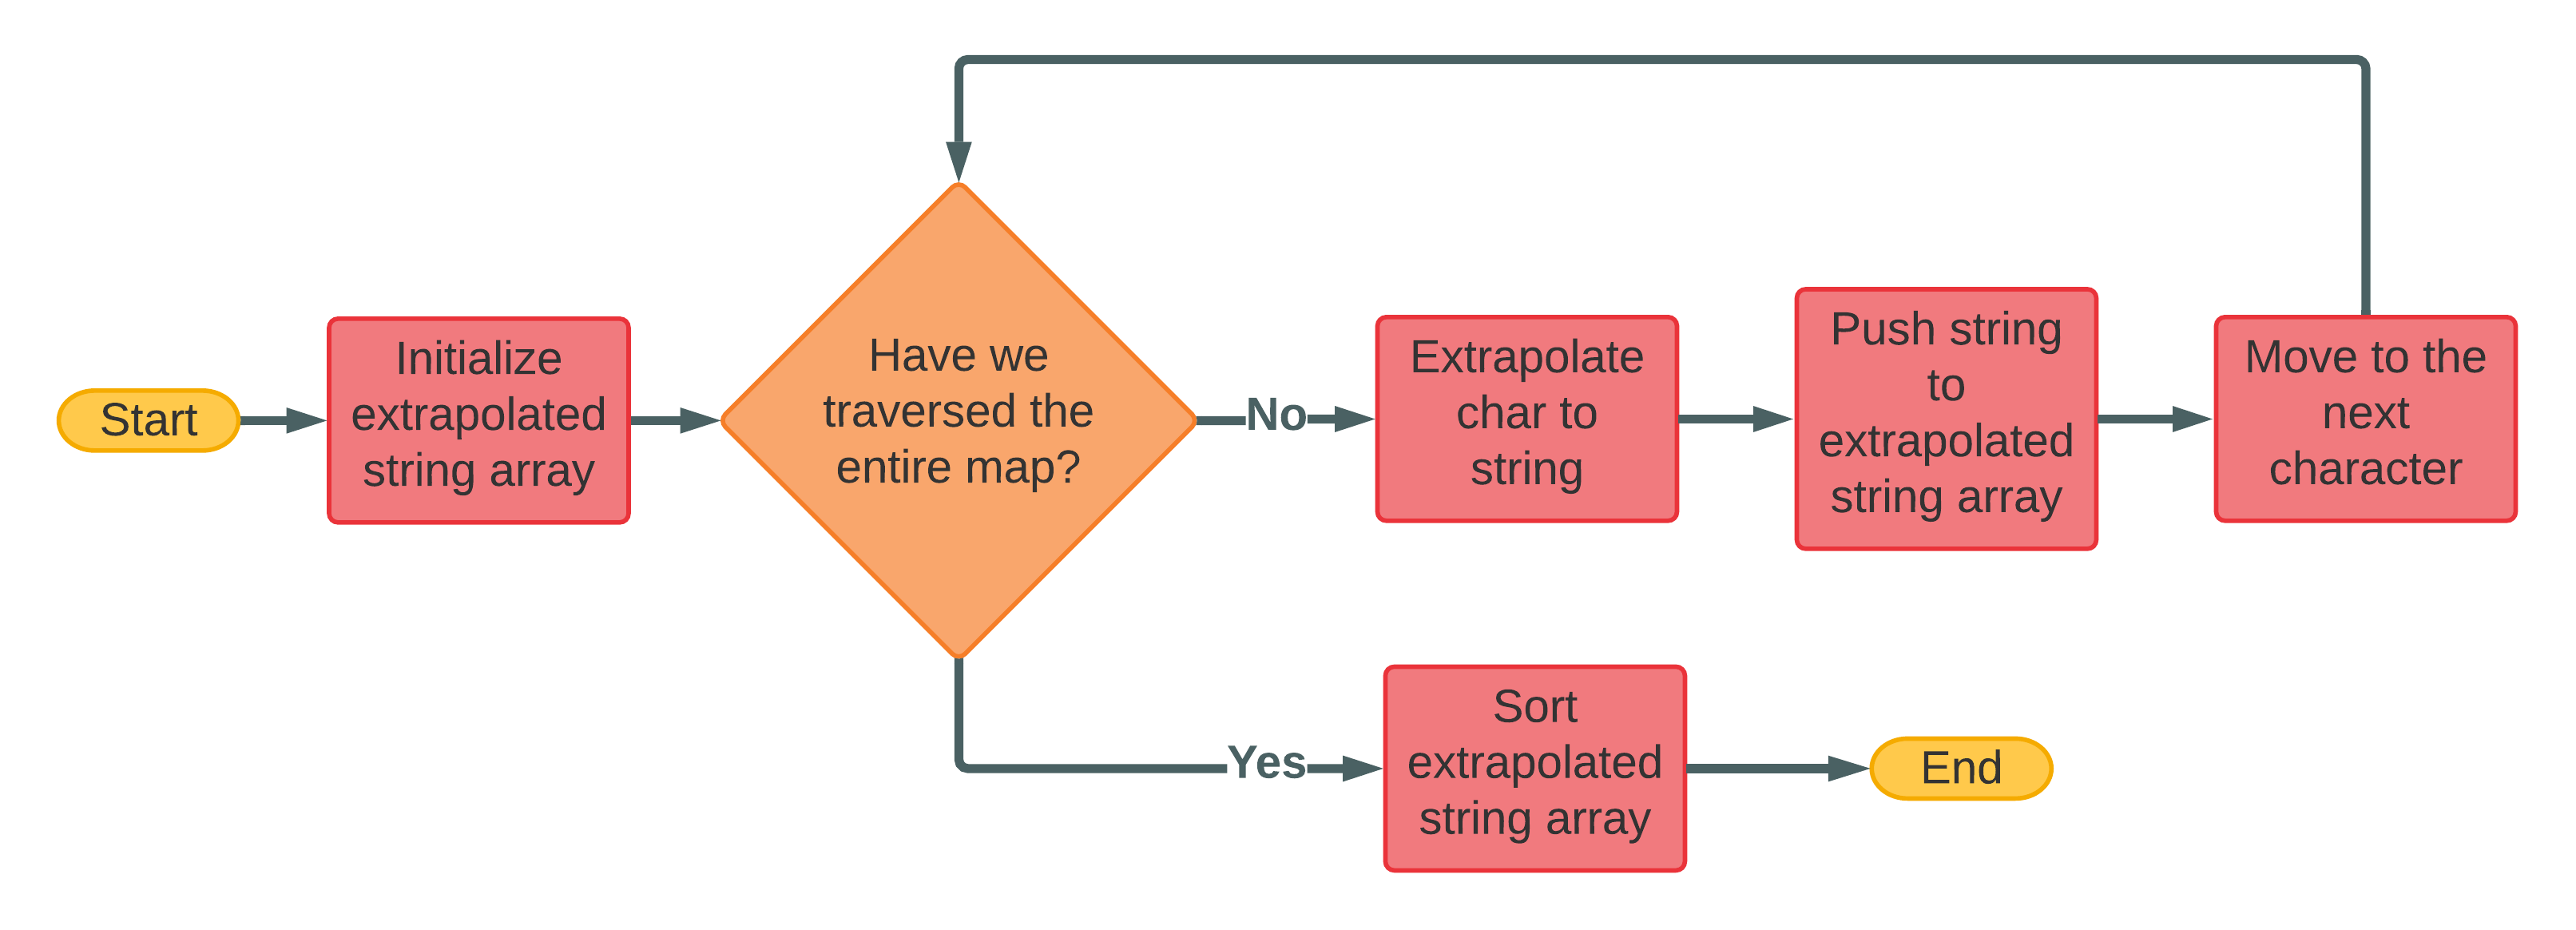 A flowchart illustrating the logic of extrapolating and sorting characters.